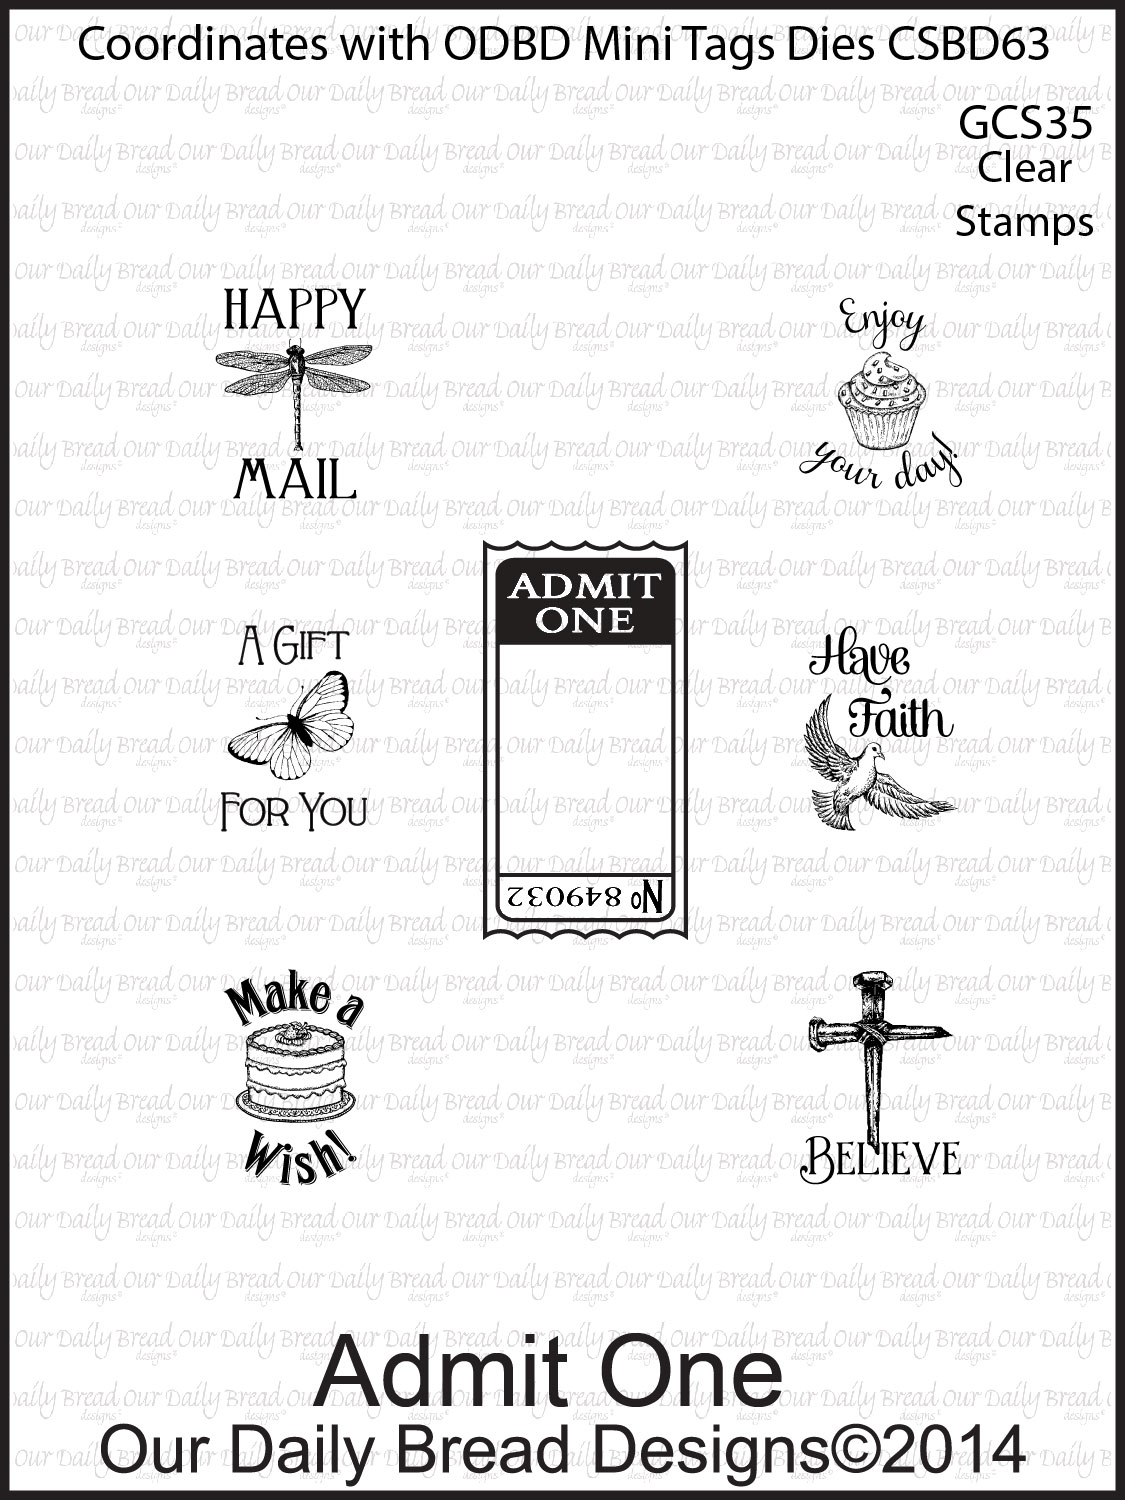 https://www.ourdailybreaddesigns.com/index.php/gcs35-admit-one-clear-stamps.html